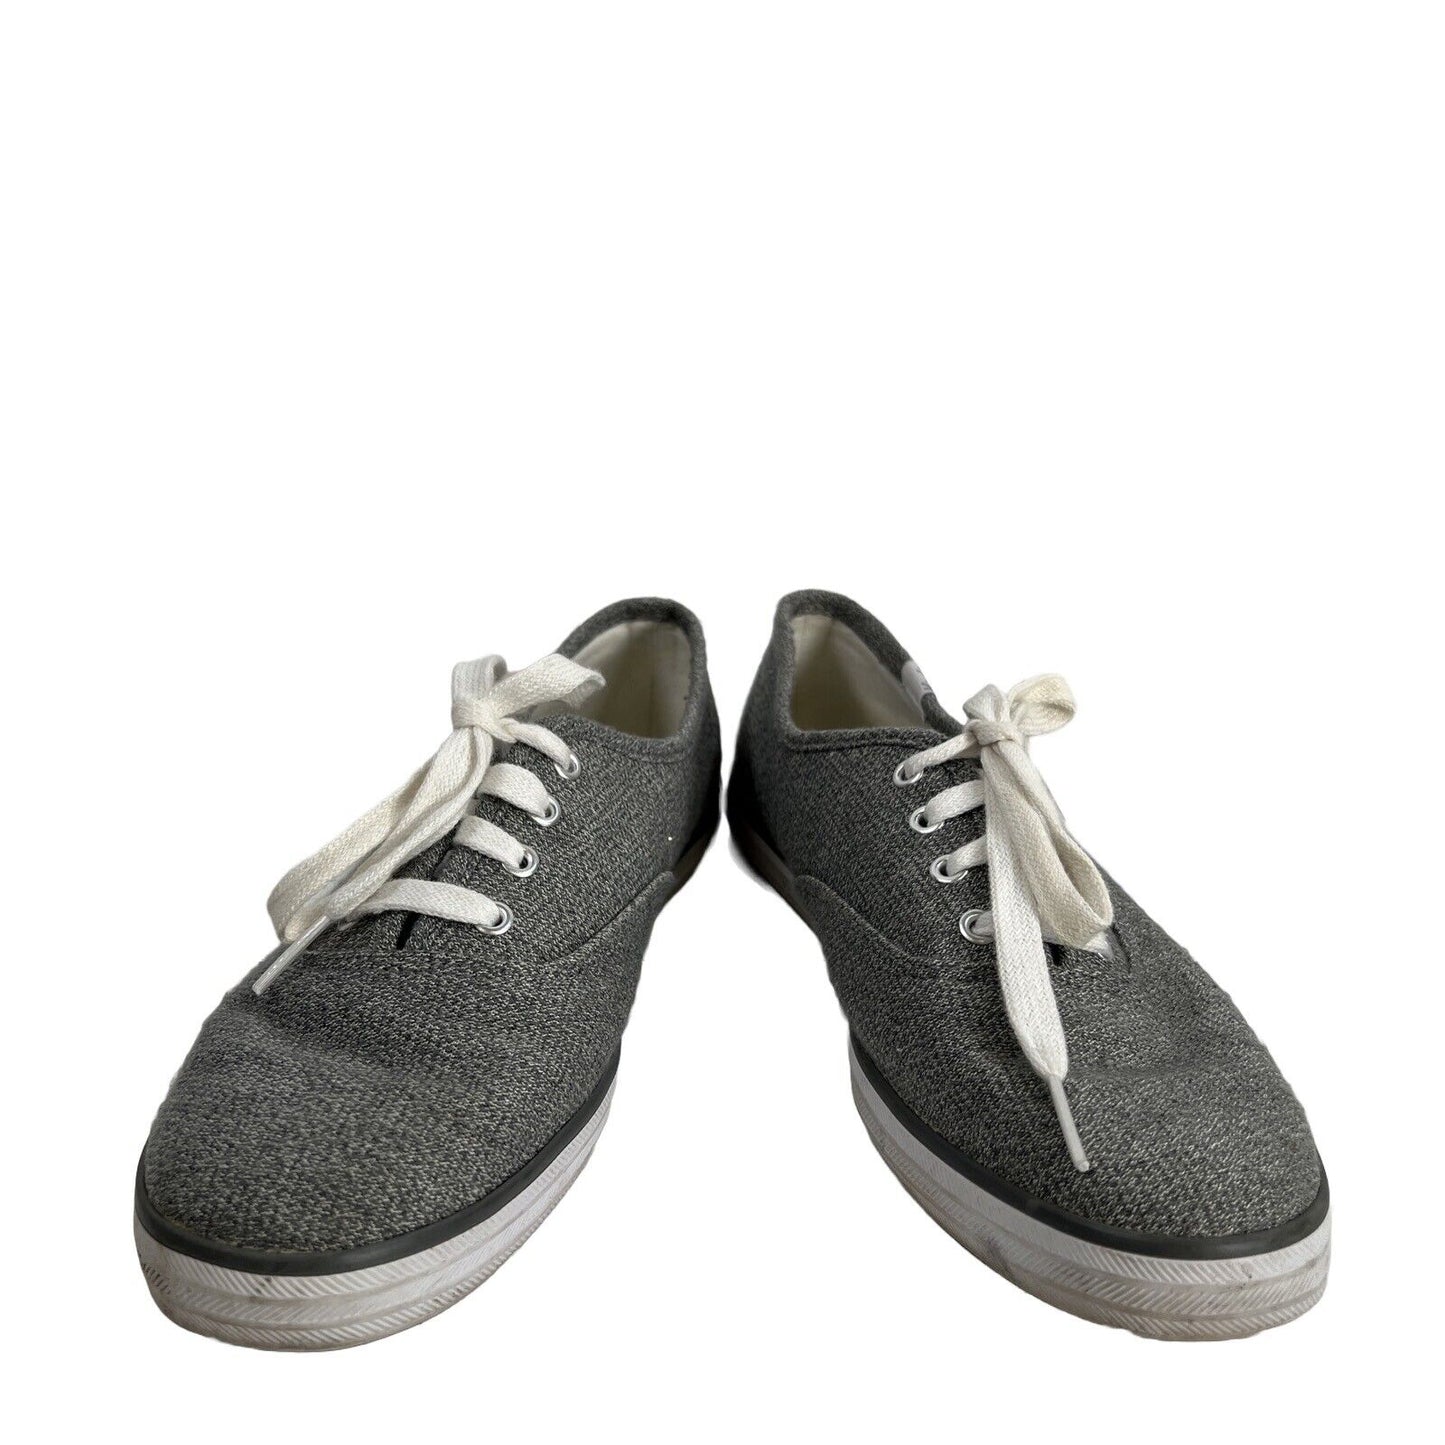 Keds Women's Gray Lace Up Casual Sneakers - 7.5